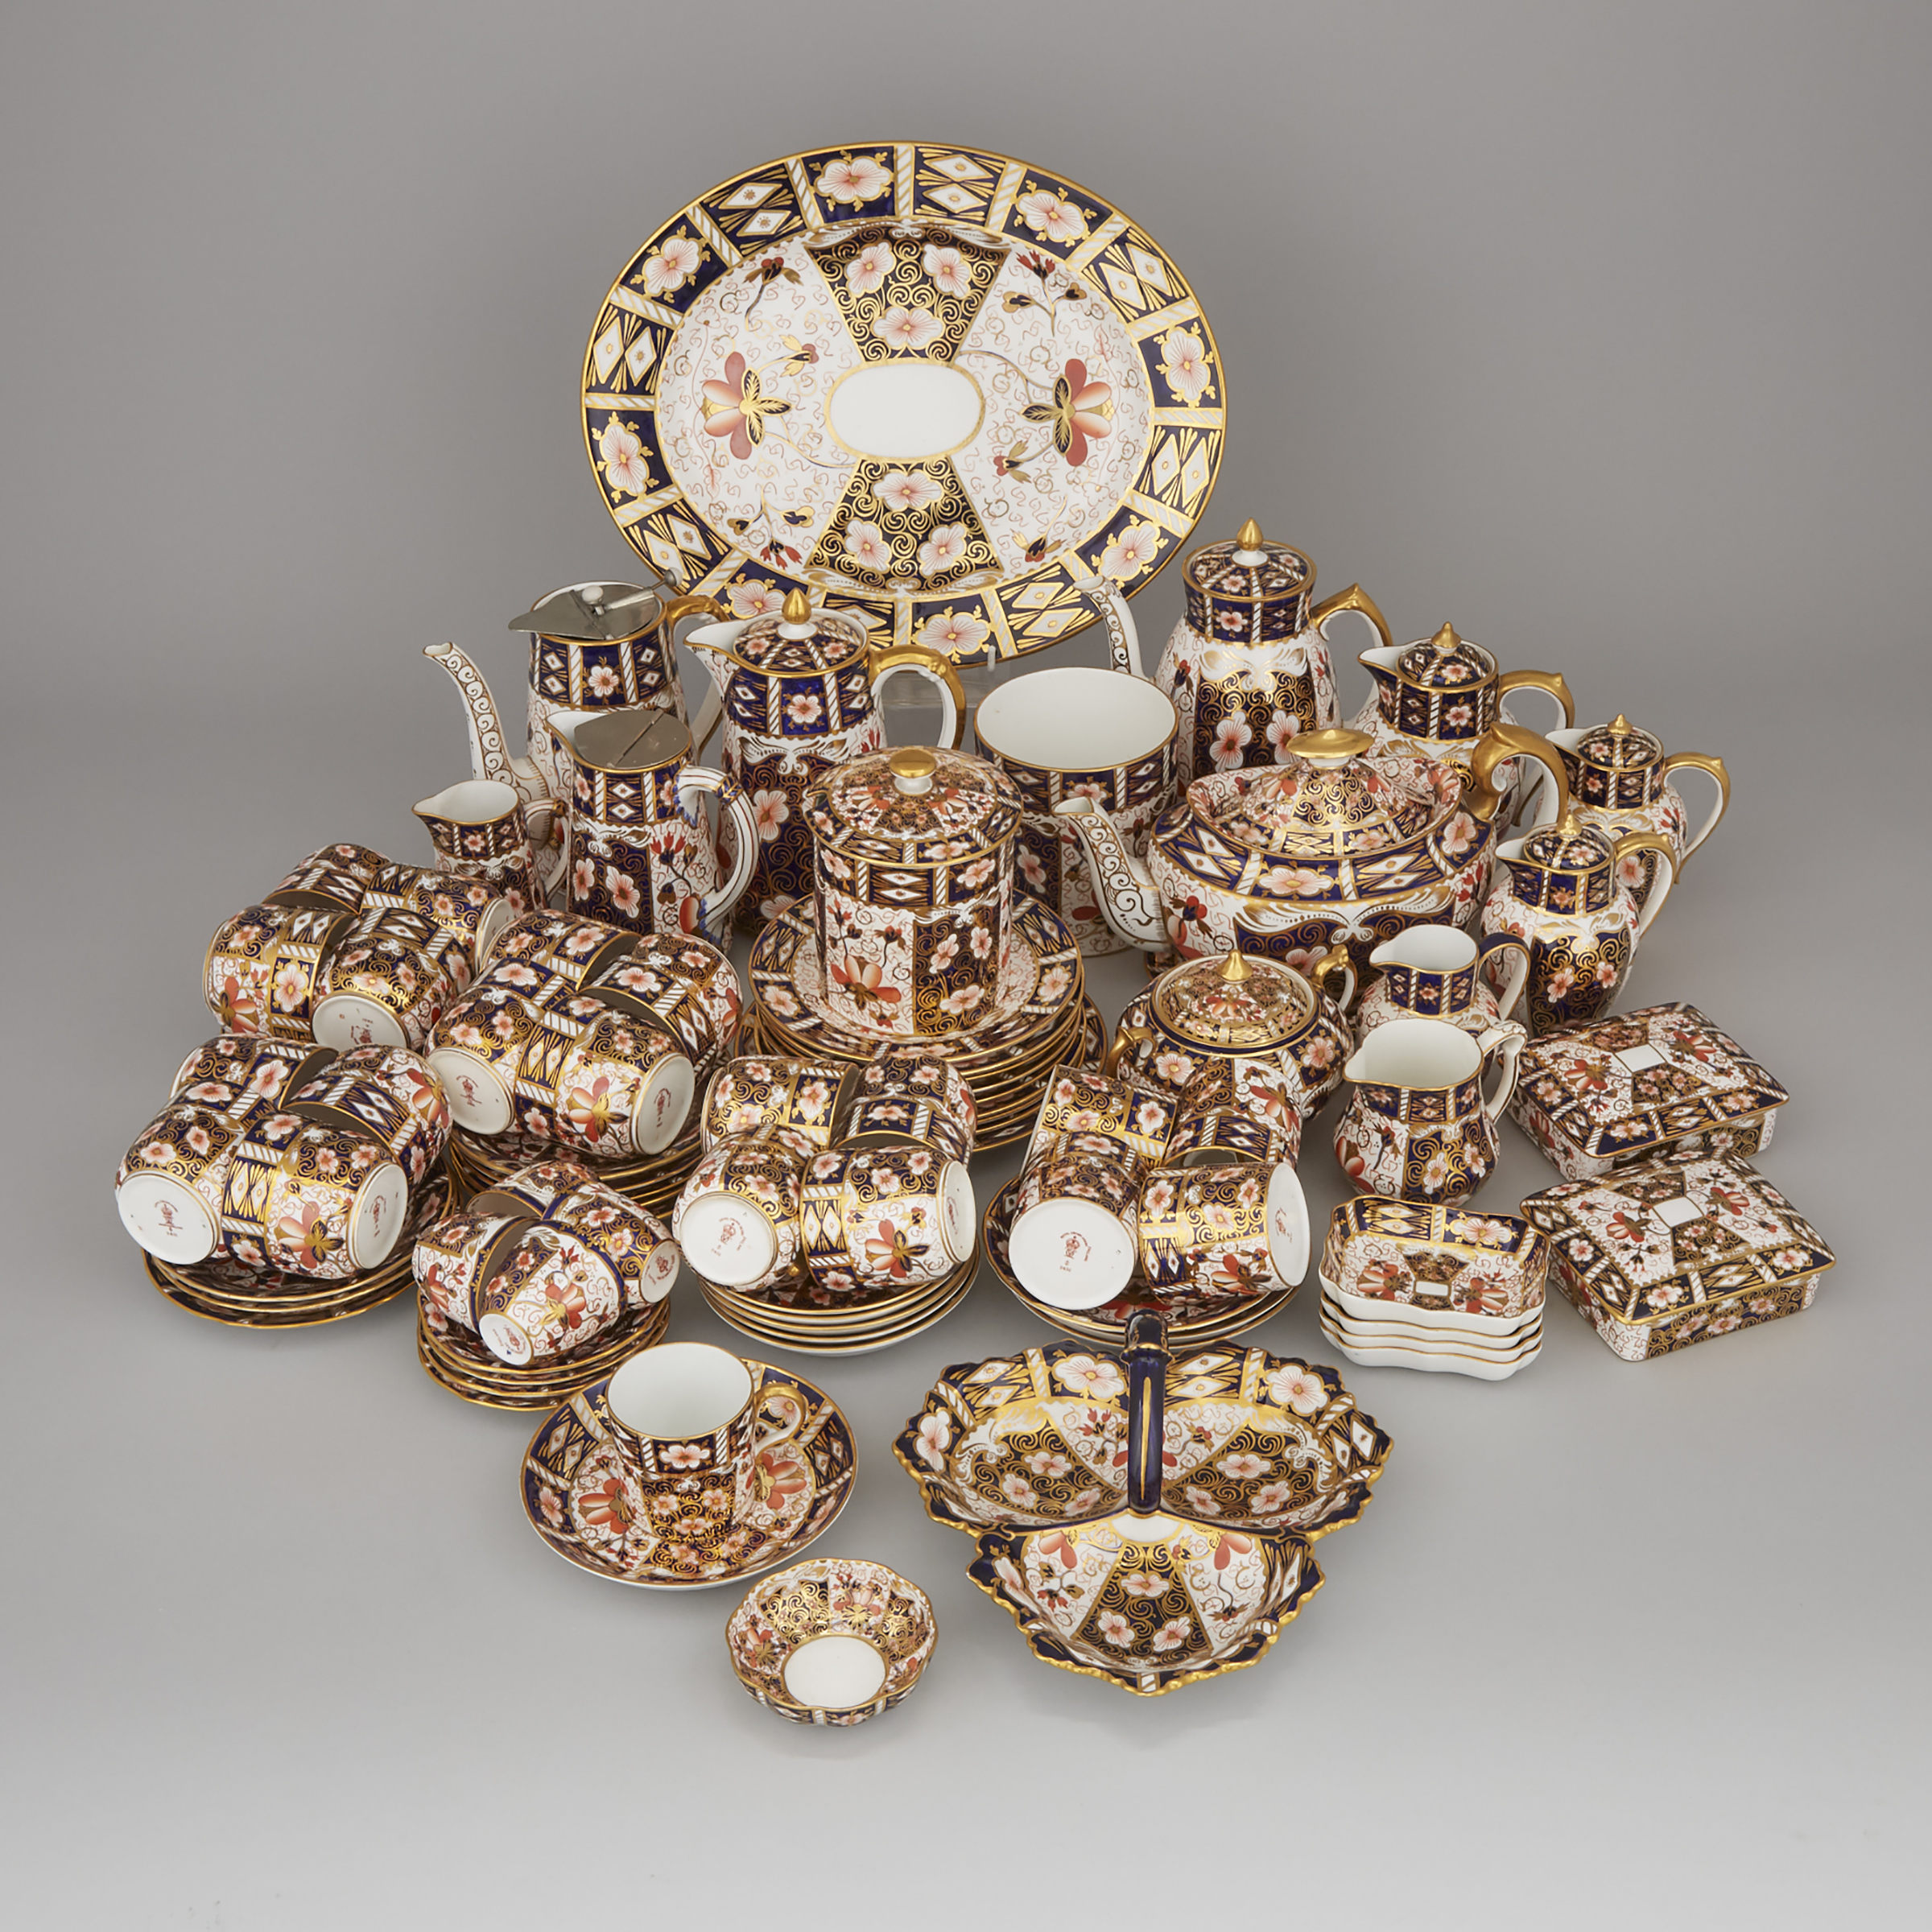 Royal Crown Derby 'Imari' (2451) Pattern Tea and Coffee Service, 20th century